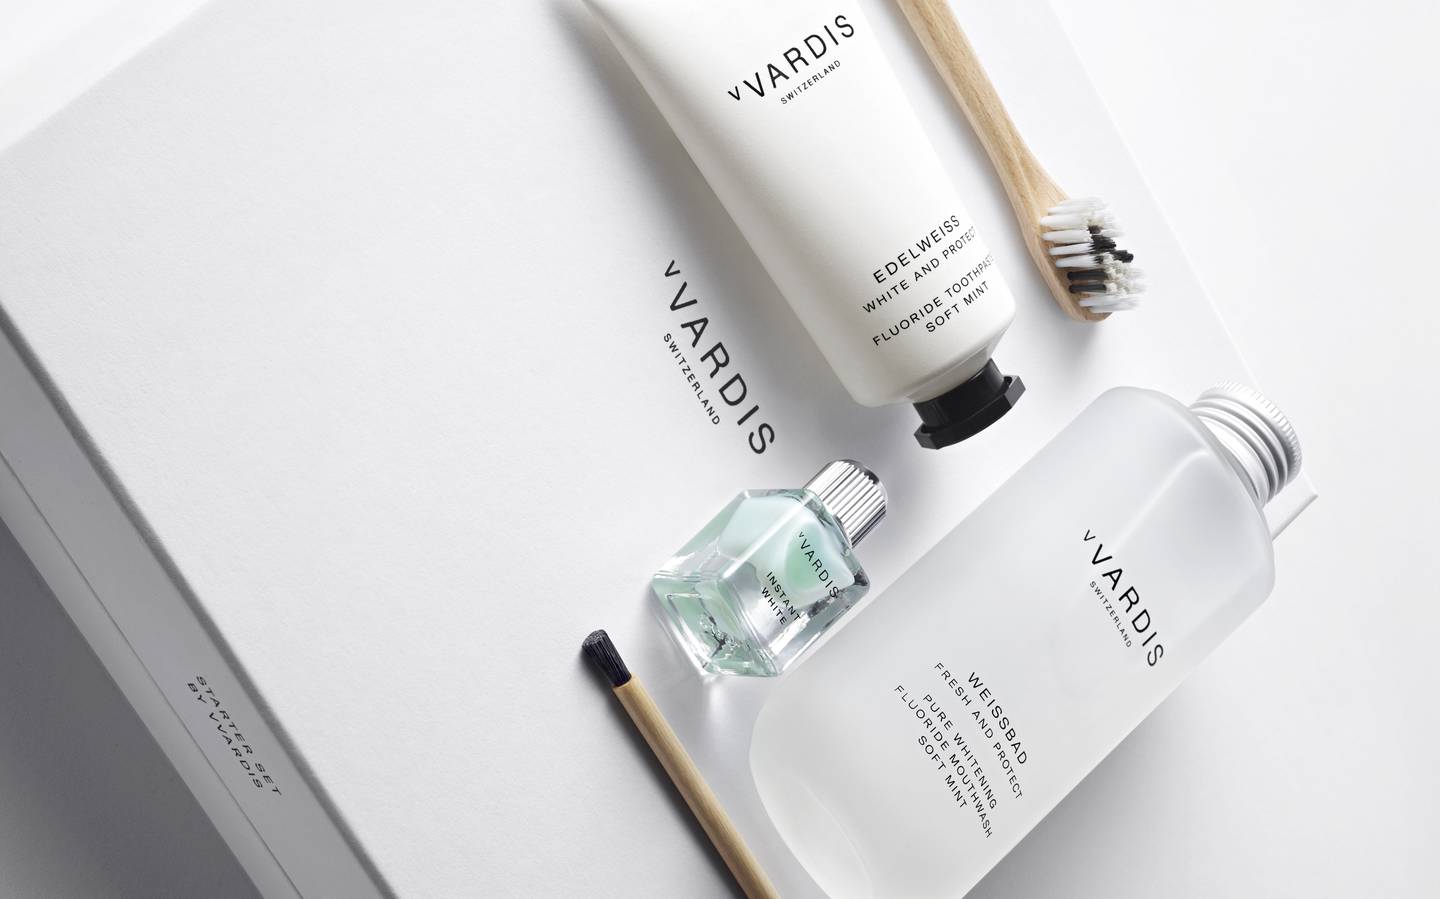 Products from oral care company Vvardis come in luxury company.